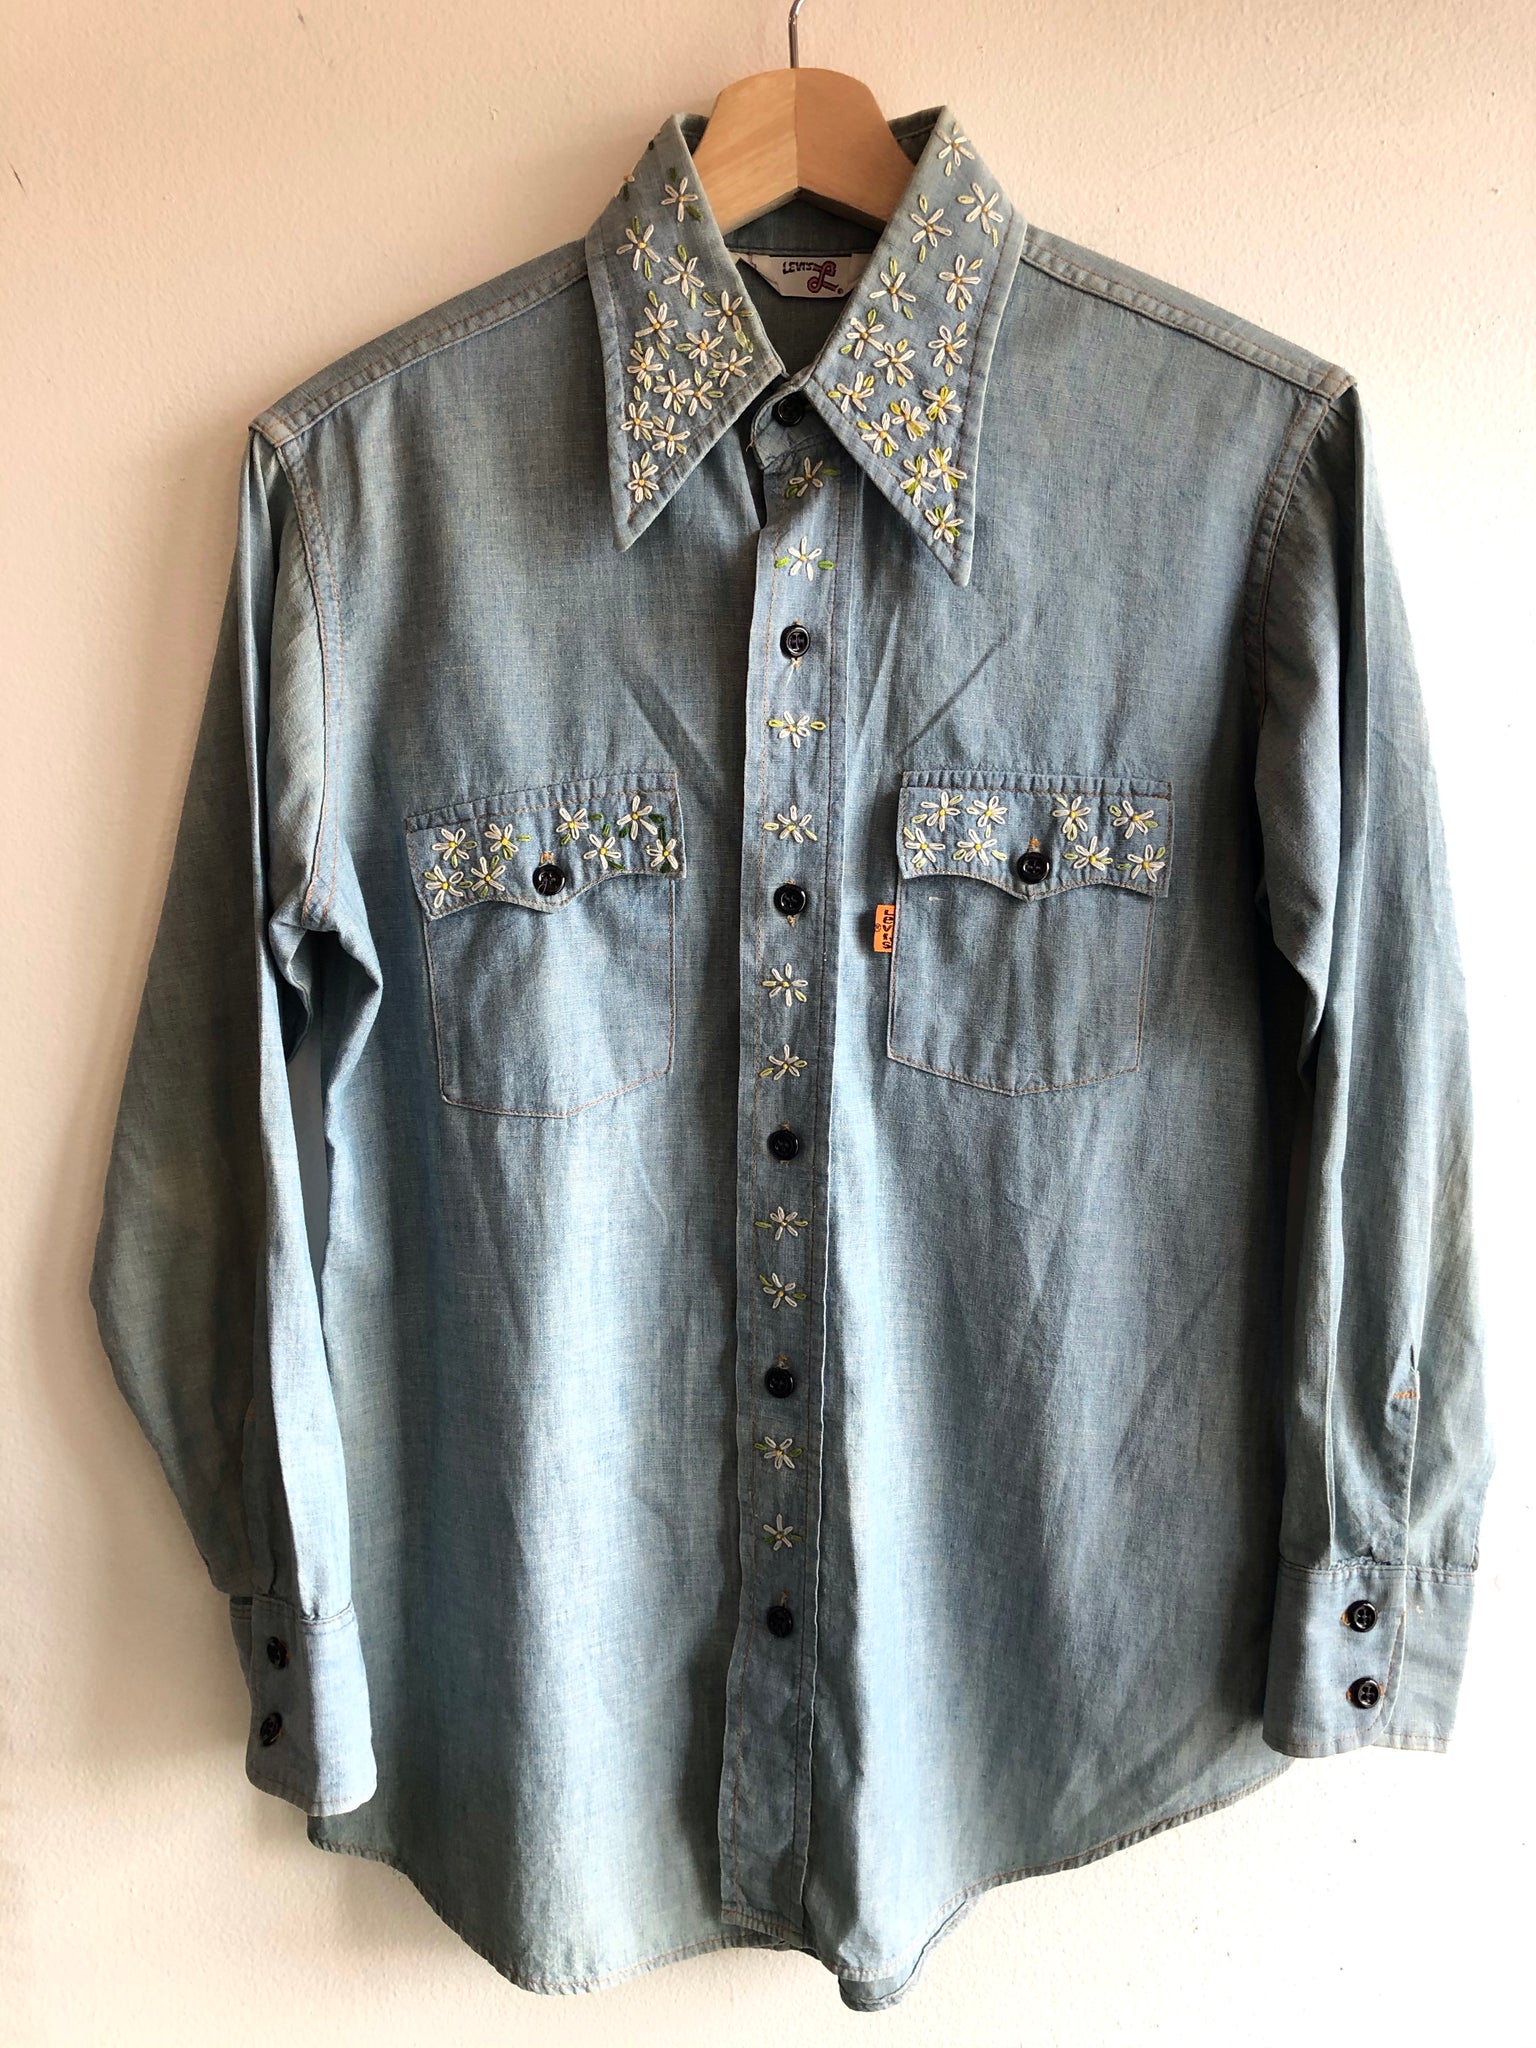 Vintage 1970’s Levi’s Embroidered Chambray Button-Up Shirt